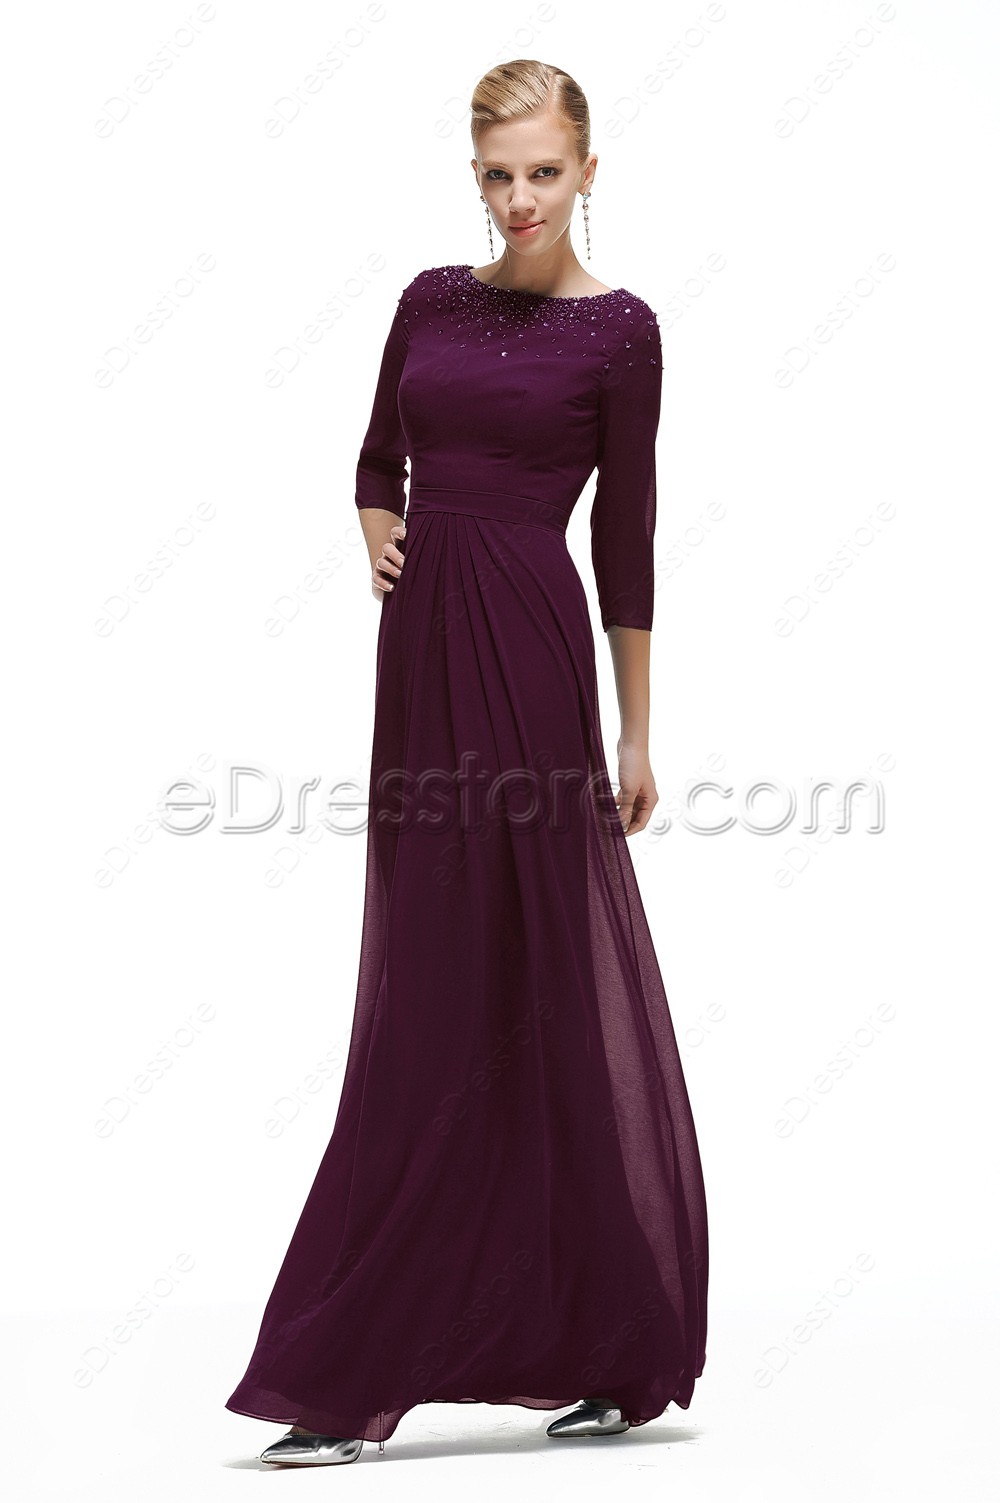 Modest Eggplant Mother Of The Groom Dresses With Sleeves Plus Size 3499